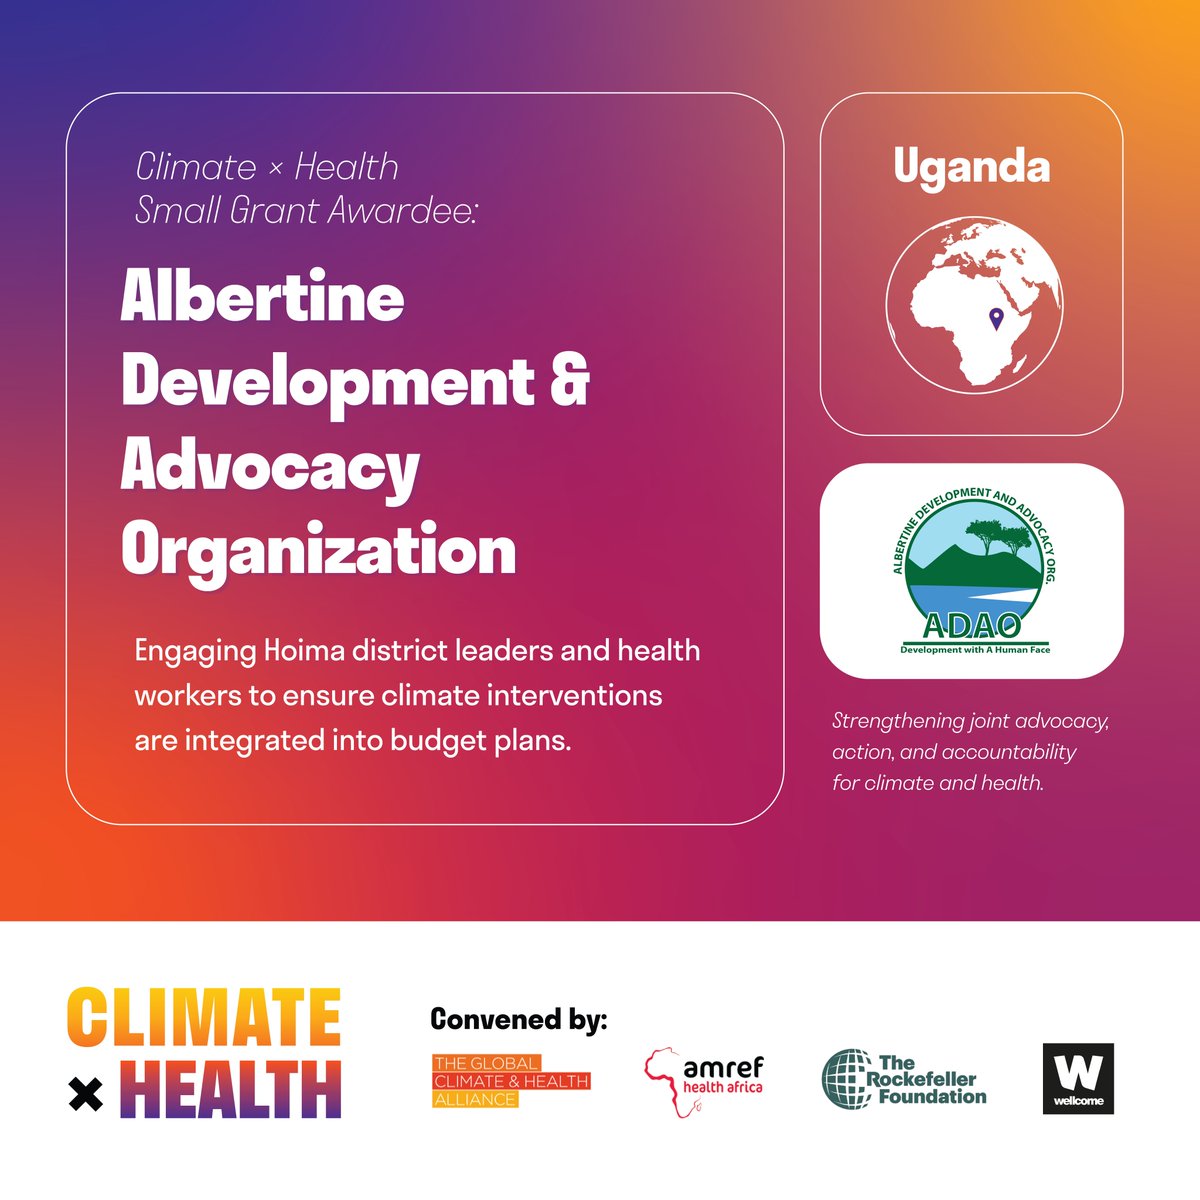 Congratulations to @AlbertineA9196, winner of a Climate x Health small grant to engage district leaders and health workers in Hoima, Uganda to integrate climate and health interventions into budget plans. Learn more about their project here: climatexhealth.org/small-grants